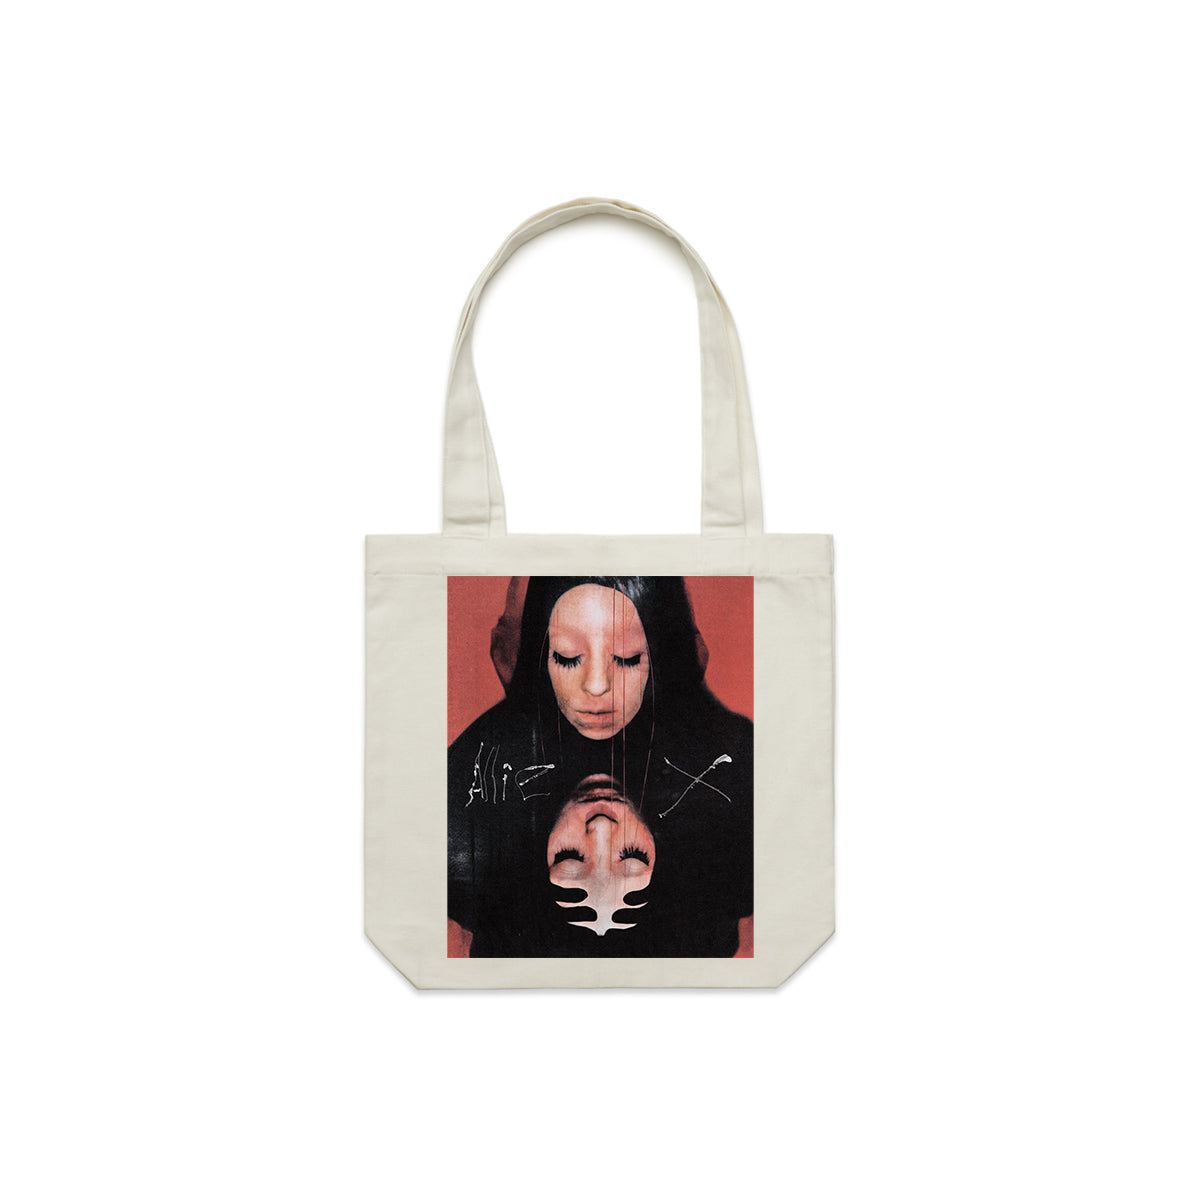 GIRL WITH NO FACE COLLAGE TOTE BAG